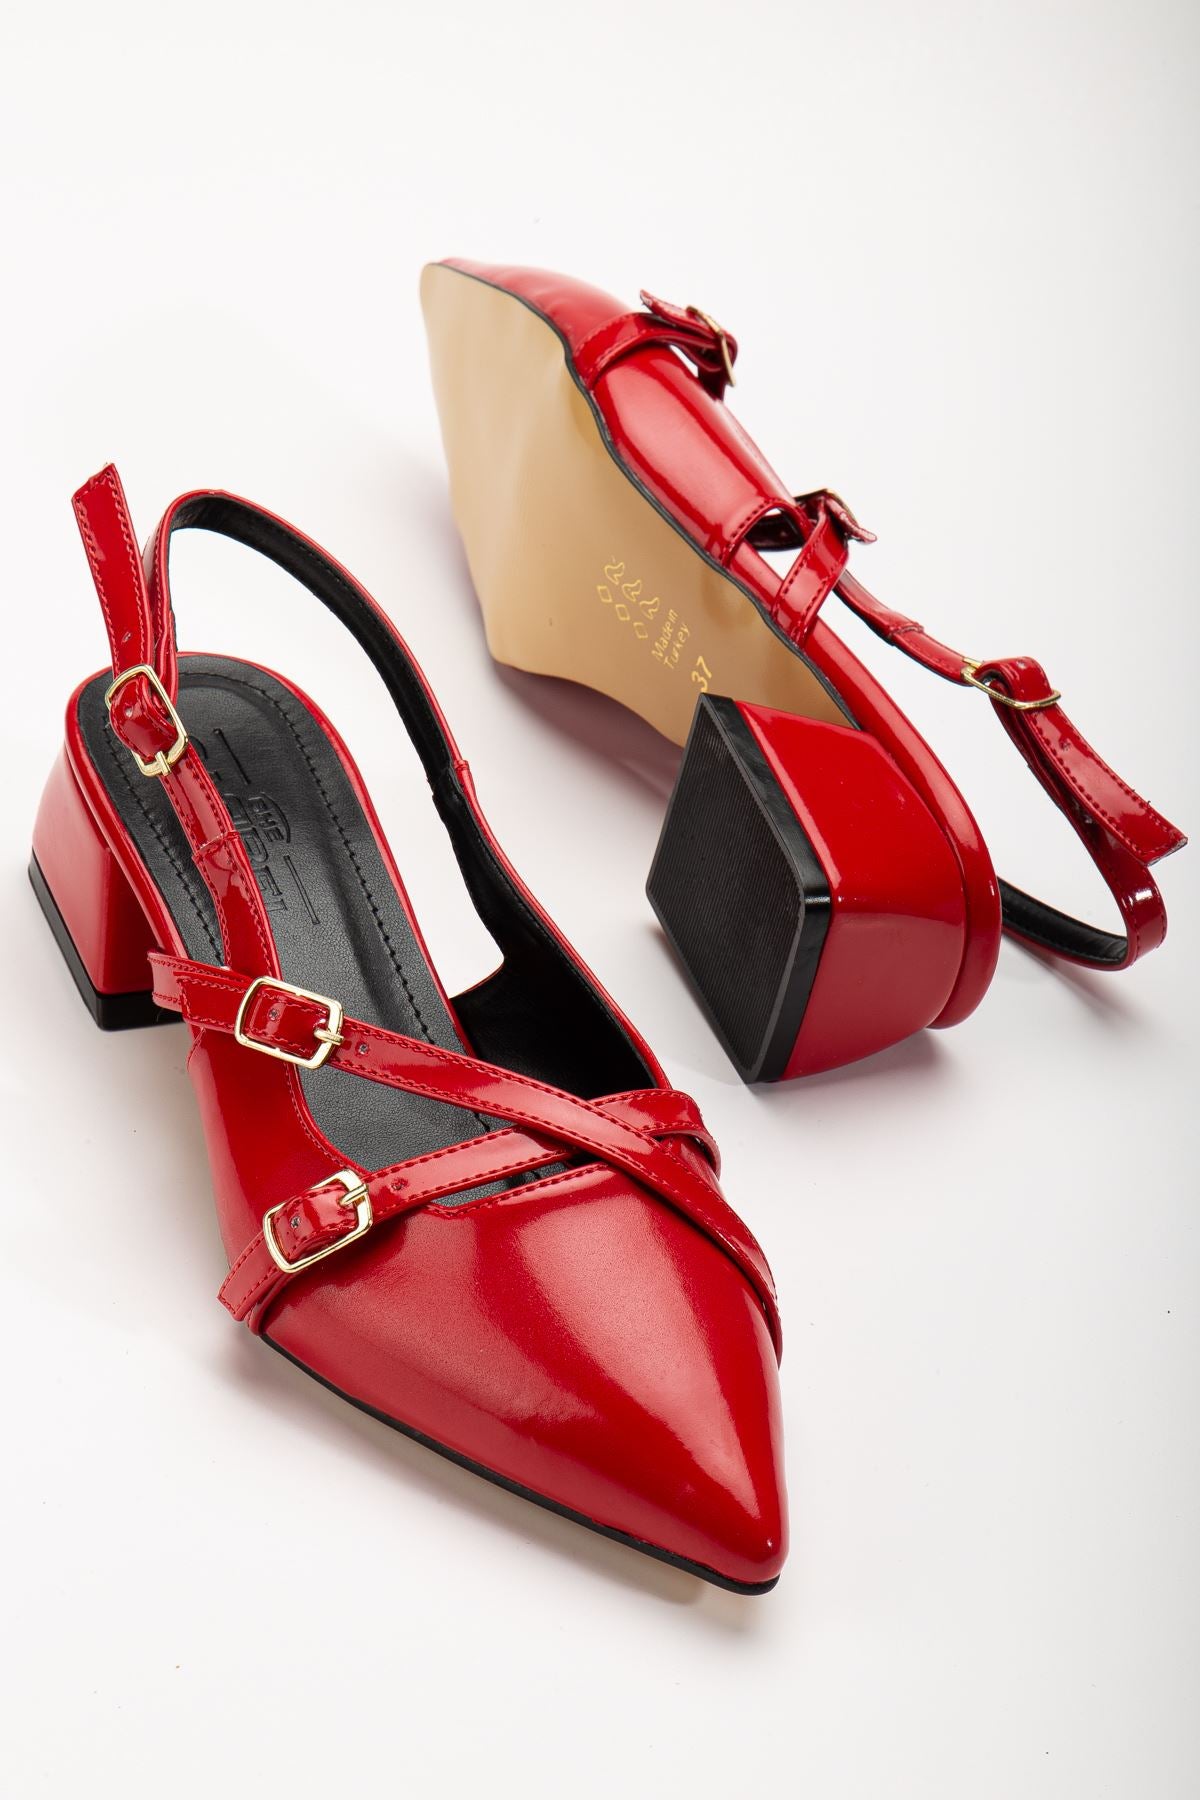 Pary Red Patent Leather Women's Heeled Shoes - STREETMODE™